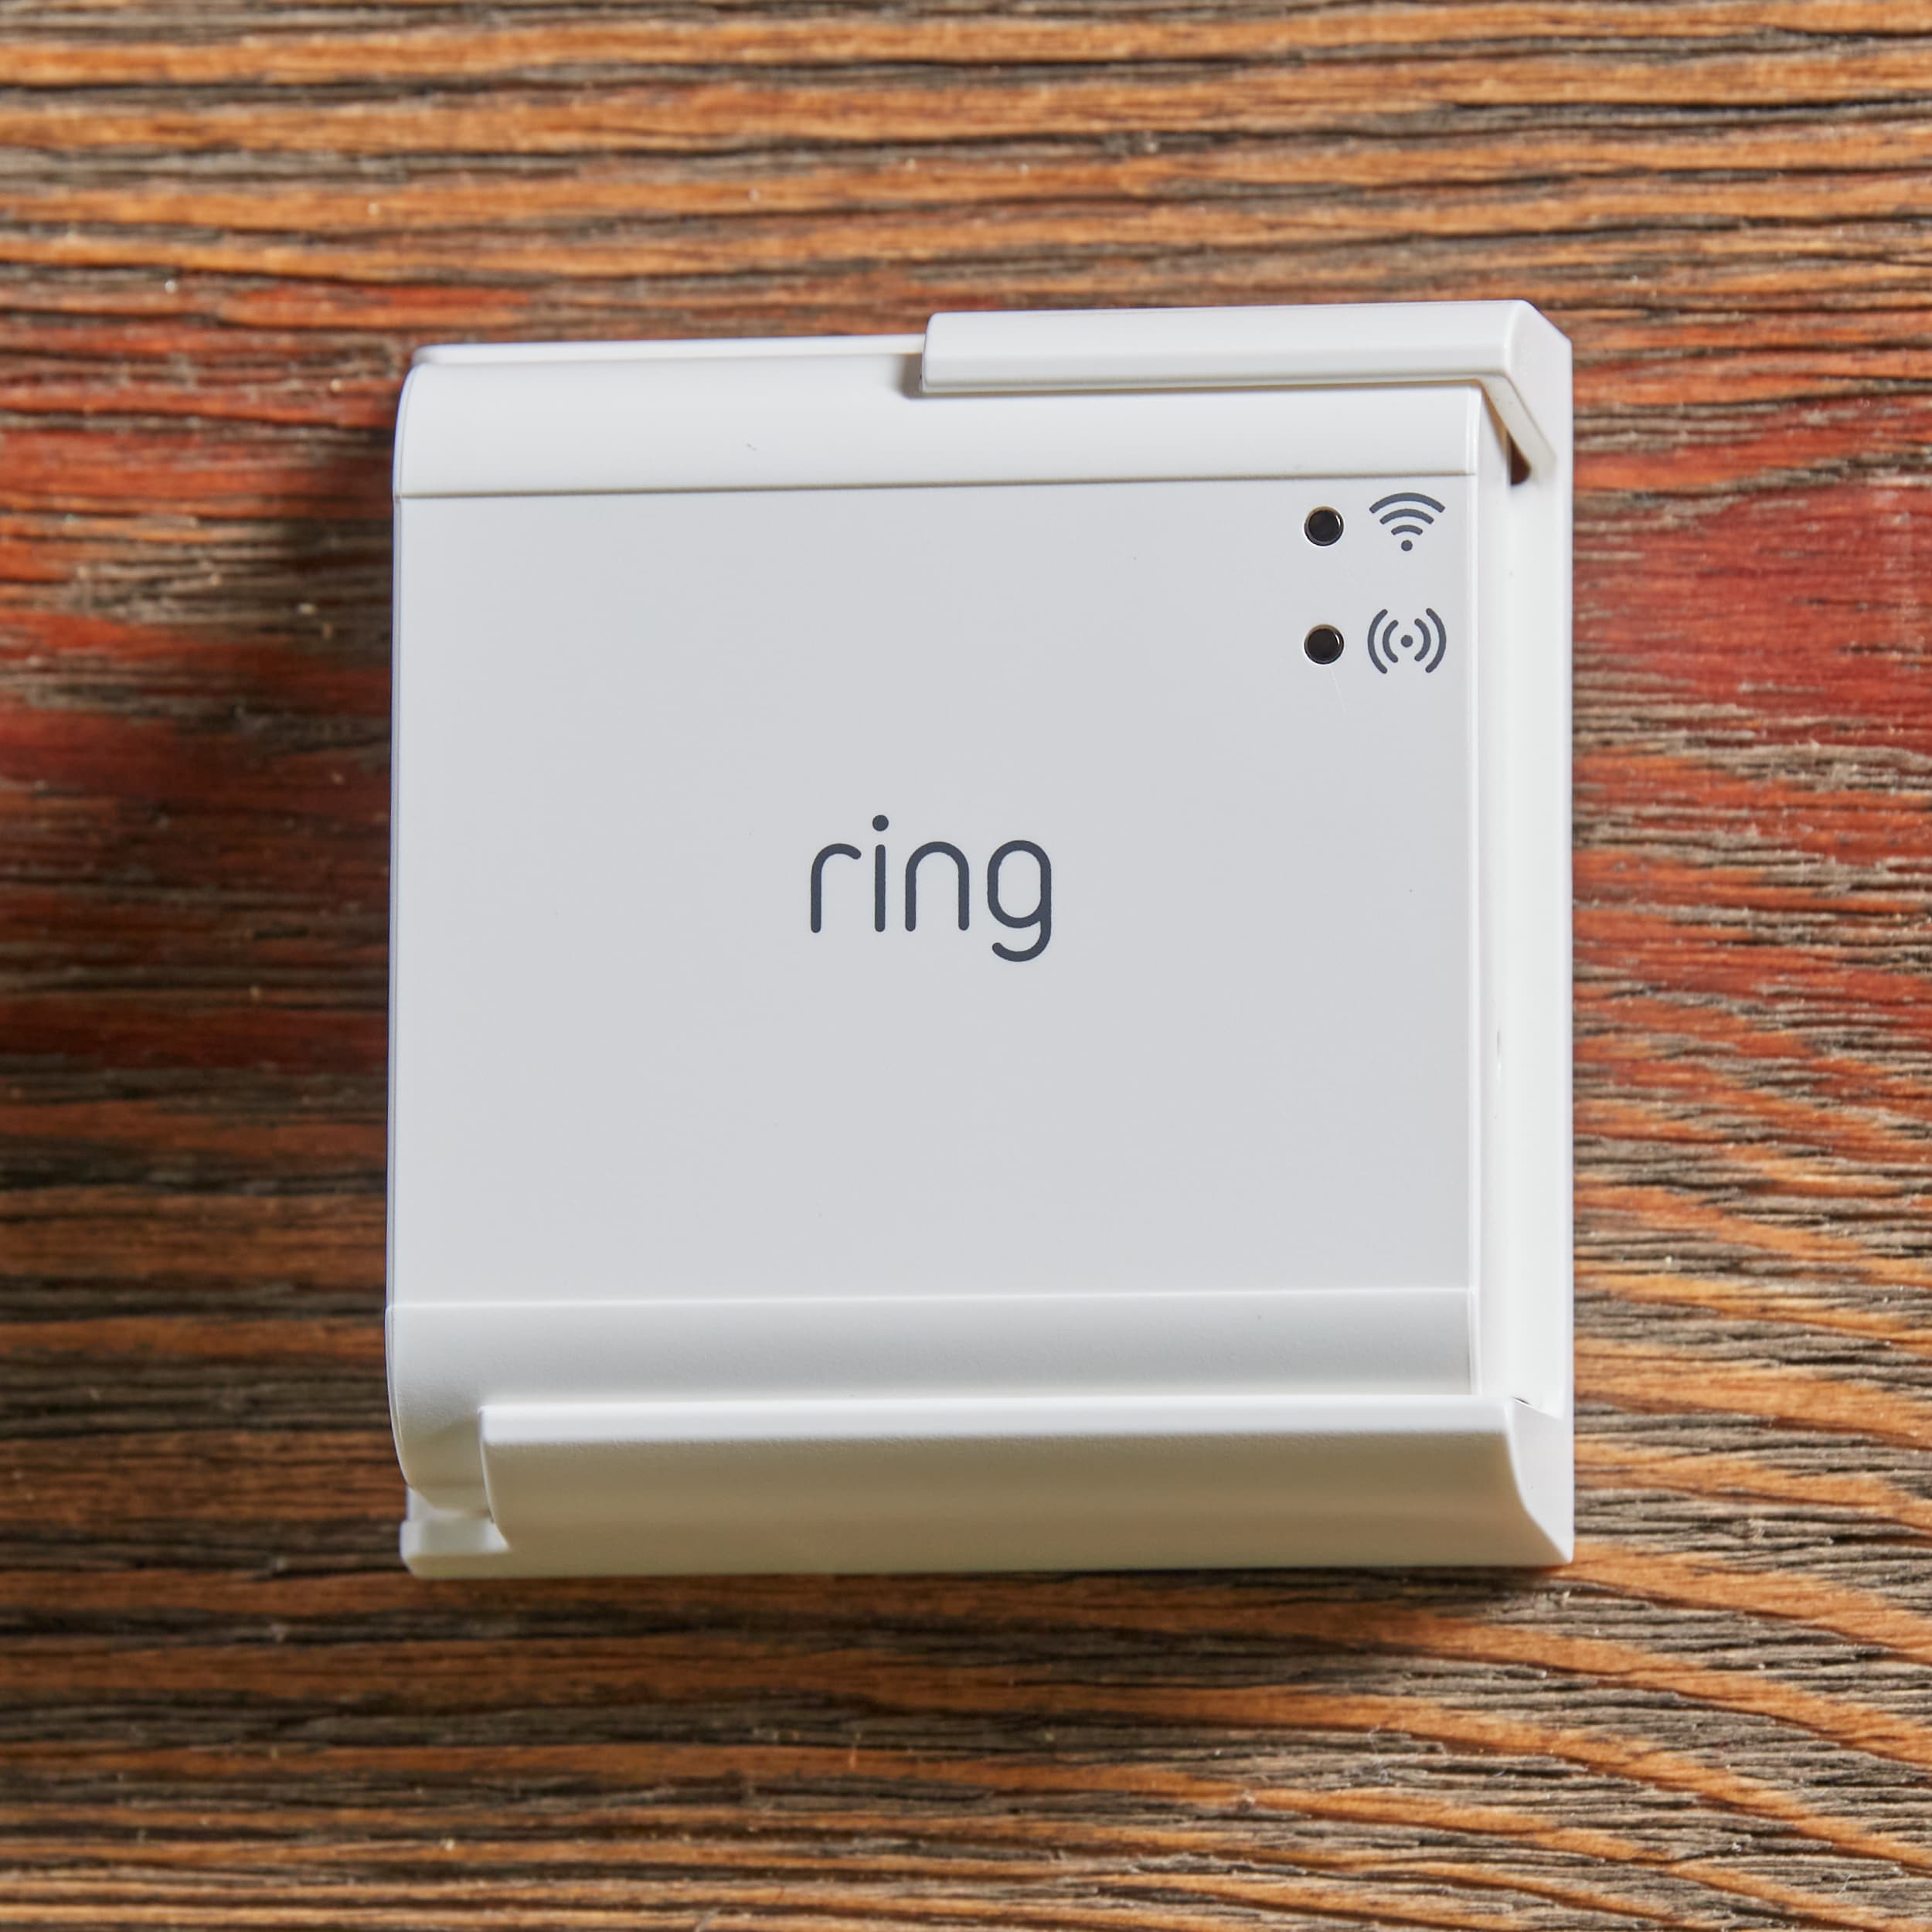 Bridge will not connect to wifi - Smart Lighting - Ring Community